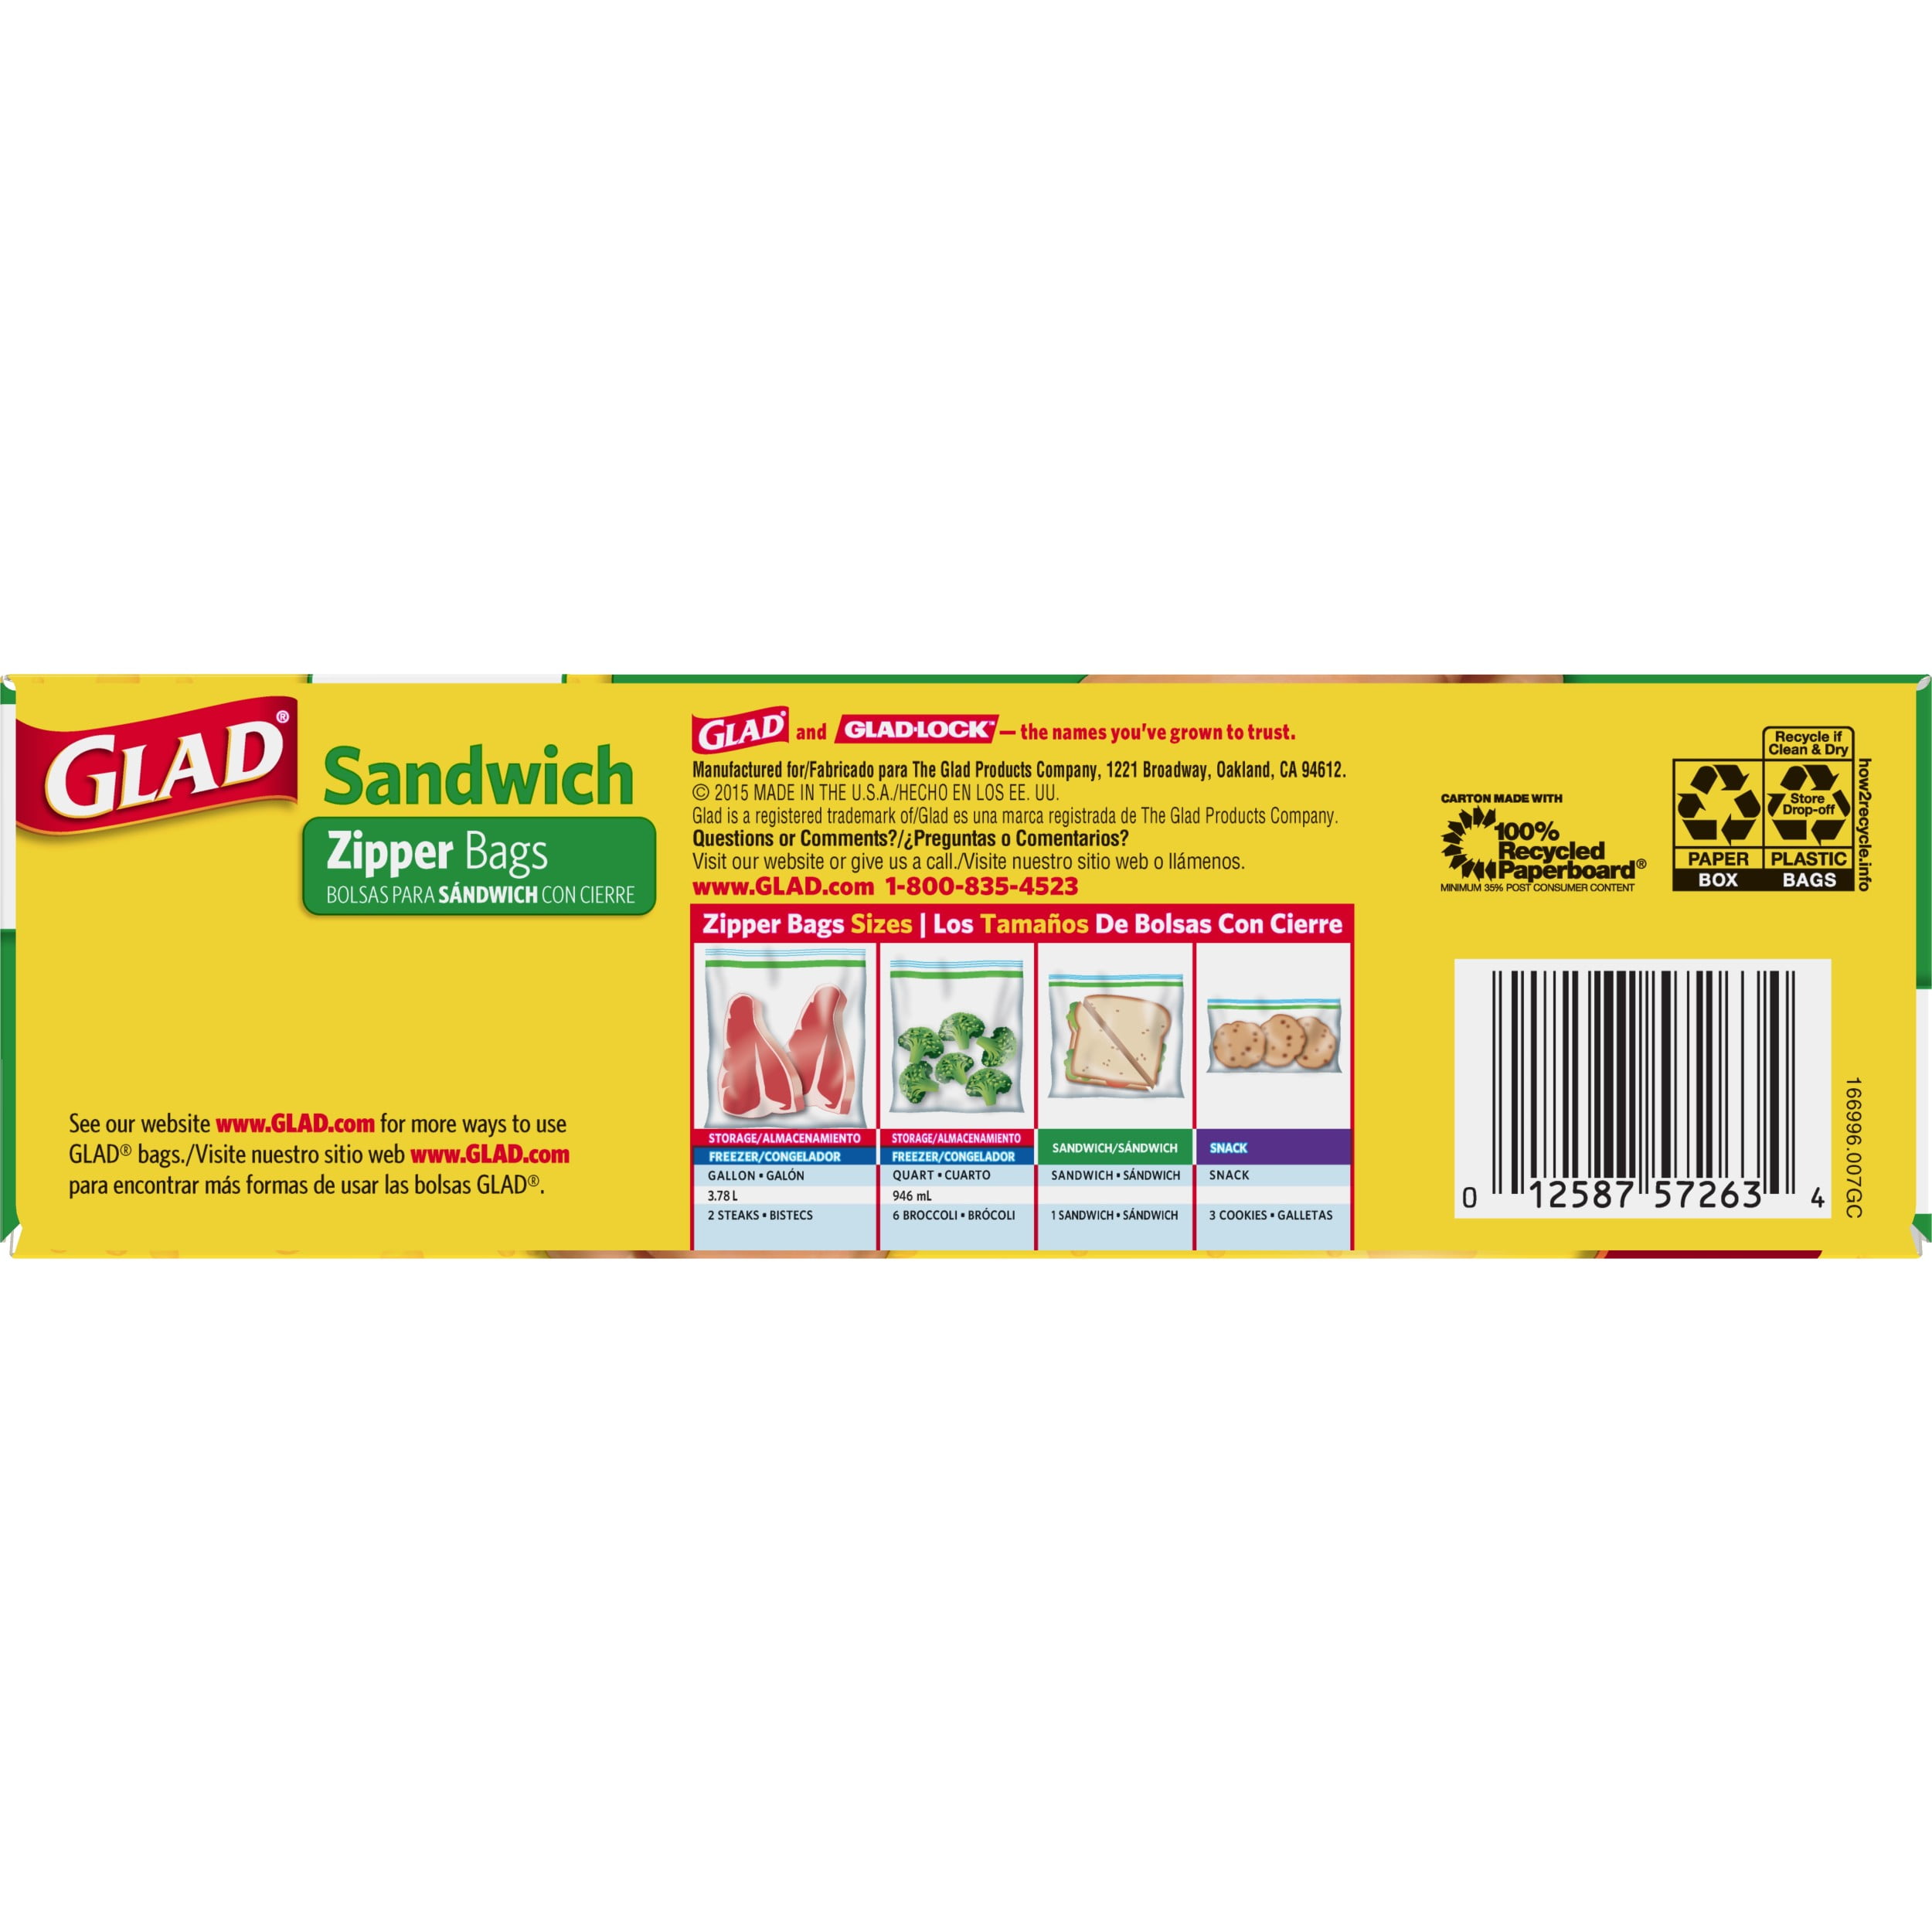 Glad Sandwich Zipper Bags Lot of 1 - 115 Count Free Ship.